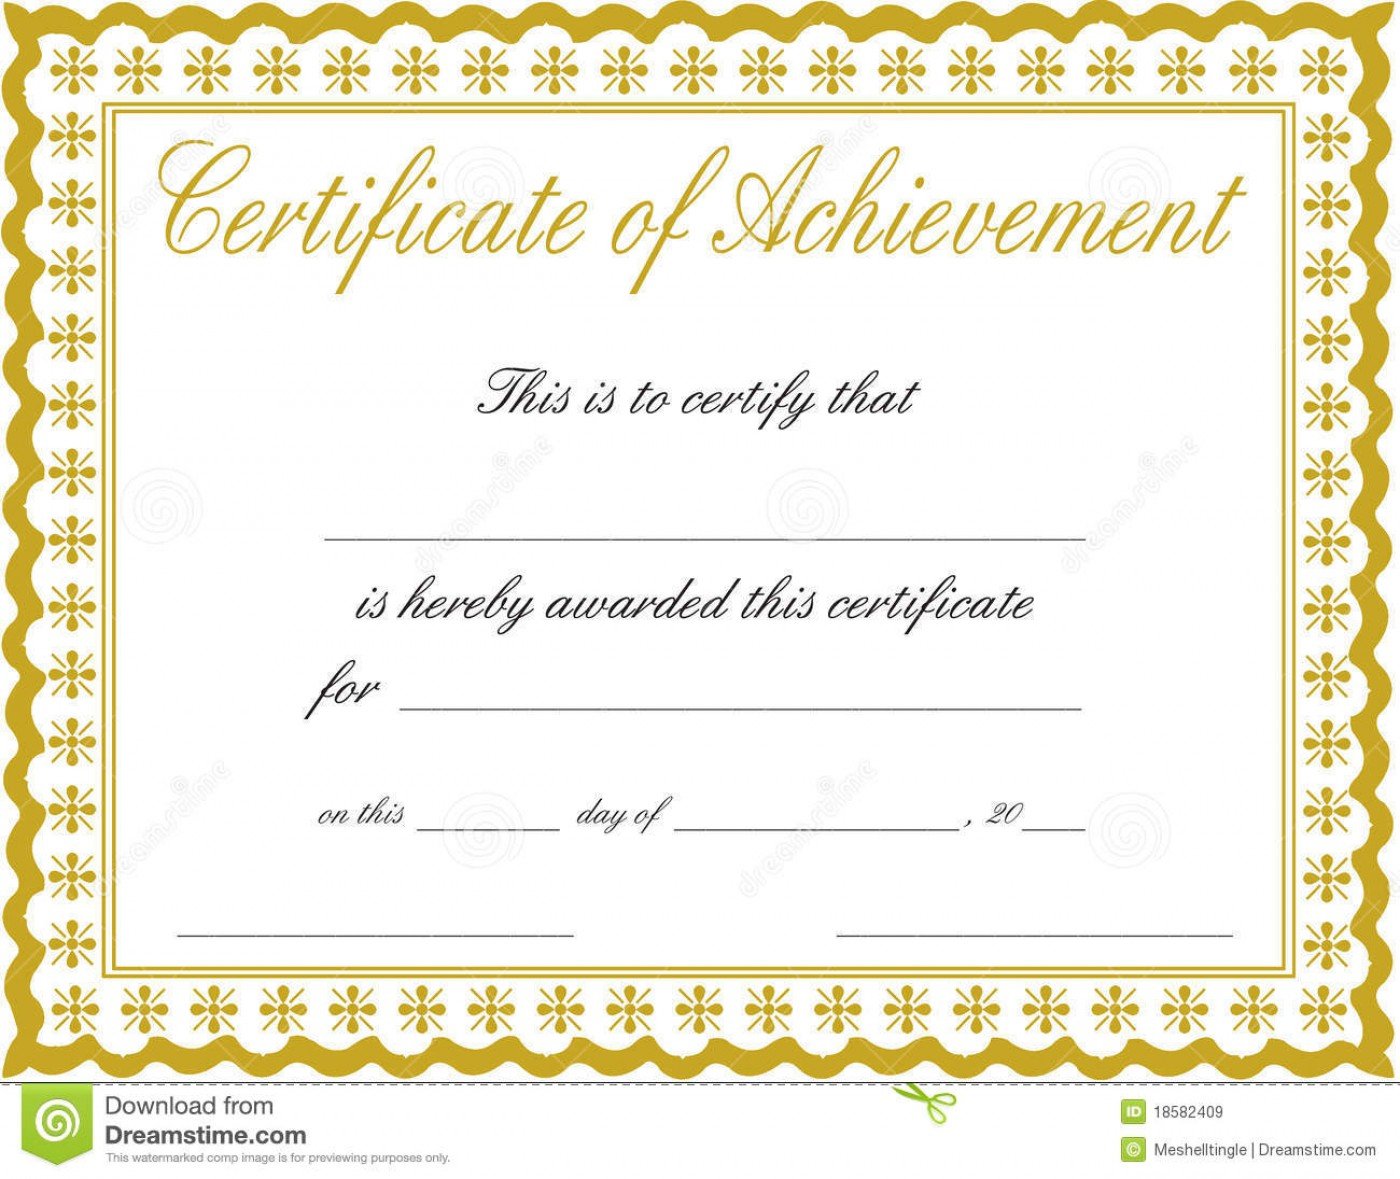 008 Certificate Of Achievement Template Free Download Word With Regard To Certificate Of Accomplishment Template Free